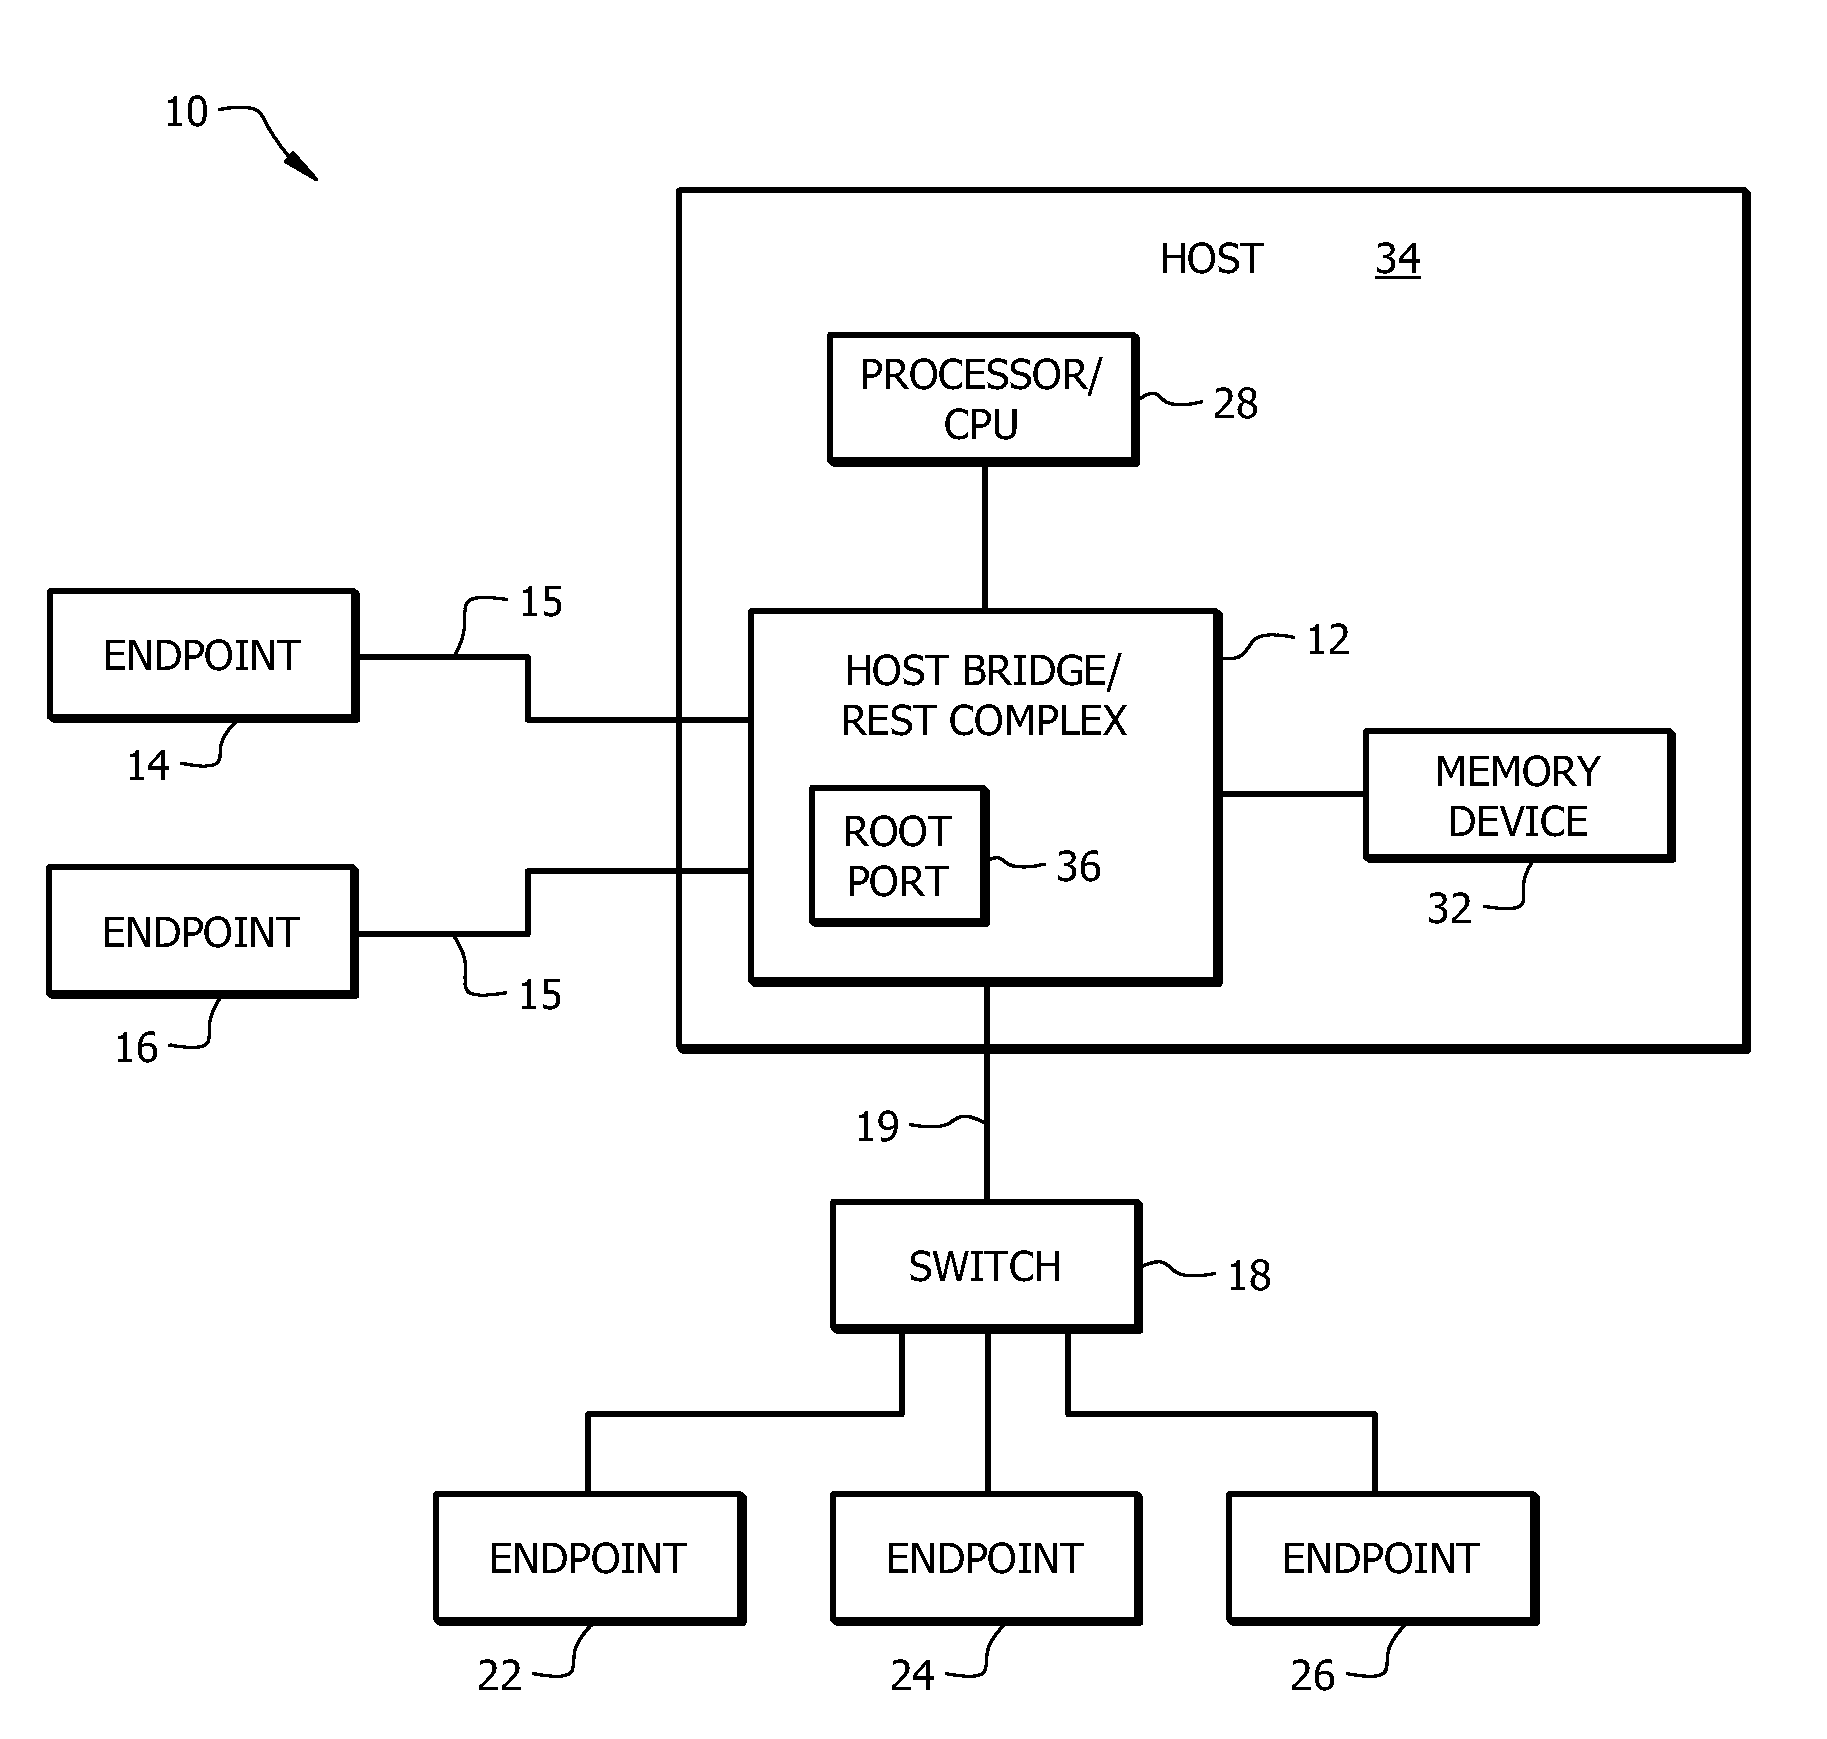 Apparatus and system having PCI root port and direct memory access device functionality